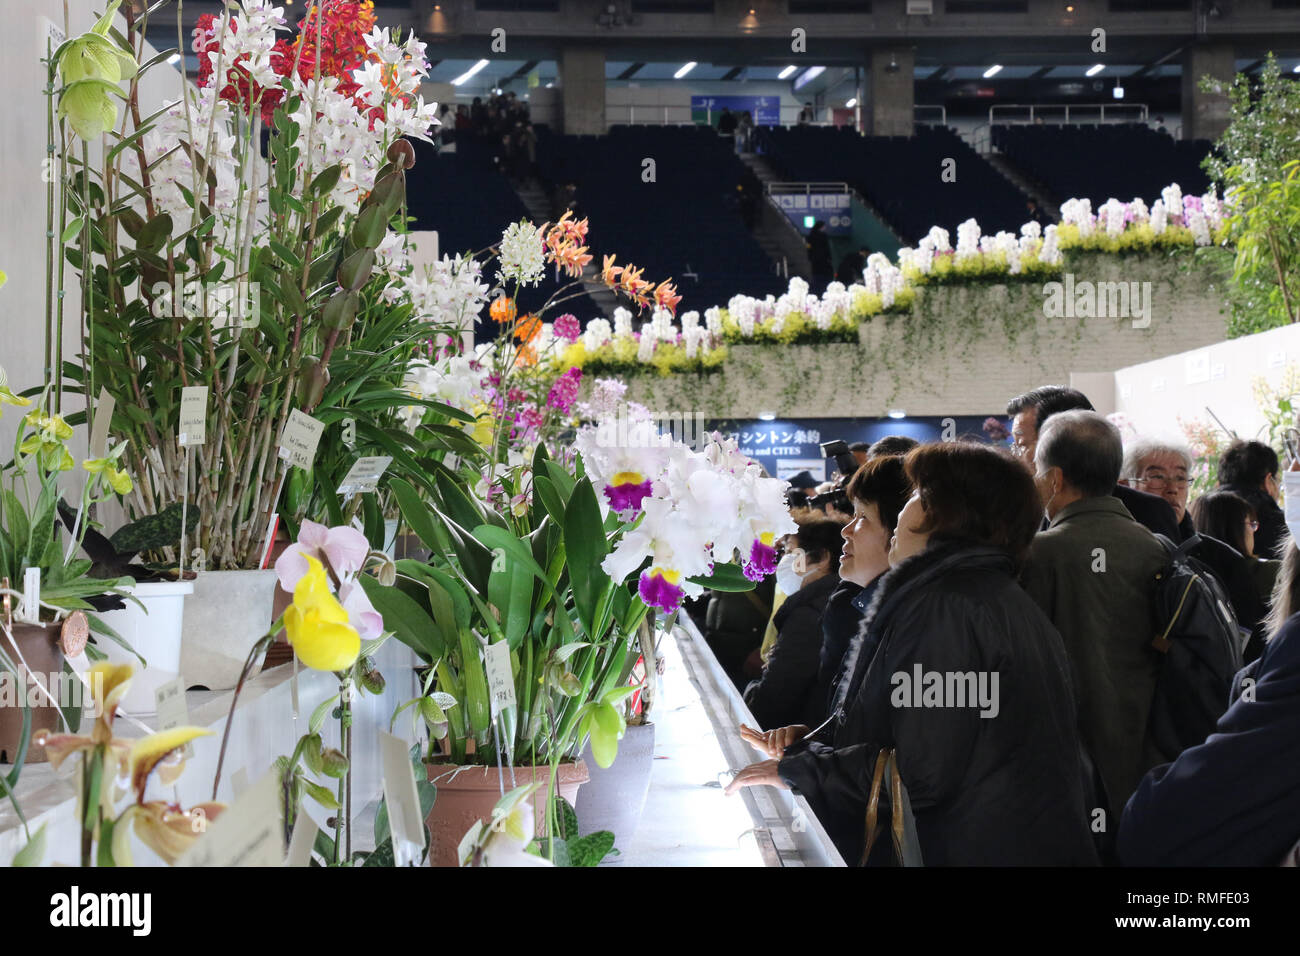 Tokyo, Japan. 15th Feb, 2019. People admire colorful orchids at 'JGP International Orchid and Flower Show' at the Tokyo Dome stadium in Tokyo on Friday, February 15, 2019. The annual flower festival with 3,000 types, 100,000 plants orchids will be held from February 15 through 22. Credit: Yoshio Tsunoda/AFLO/Alamy Live News Stock Photo